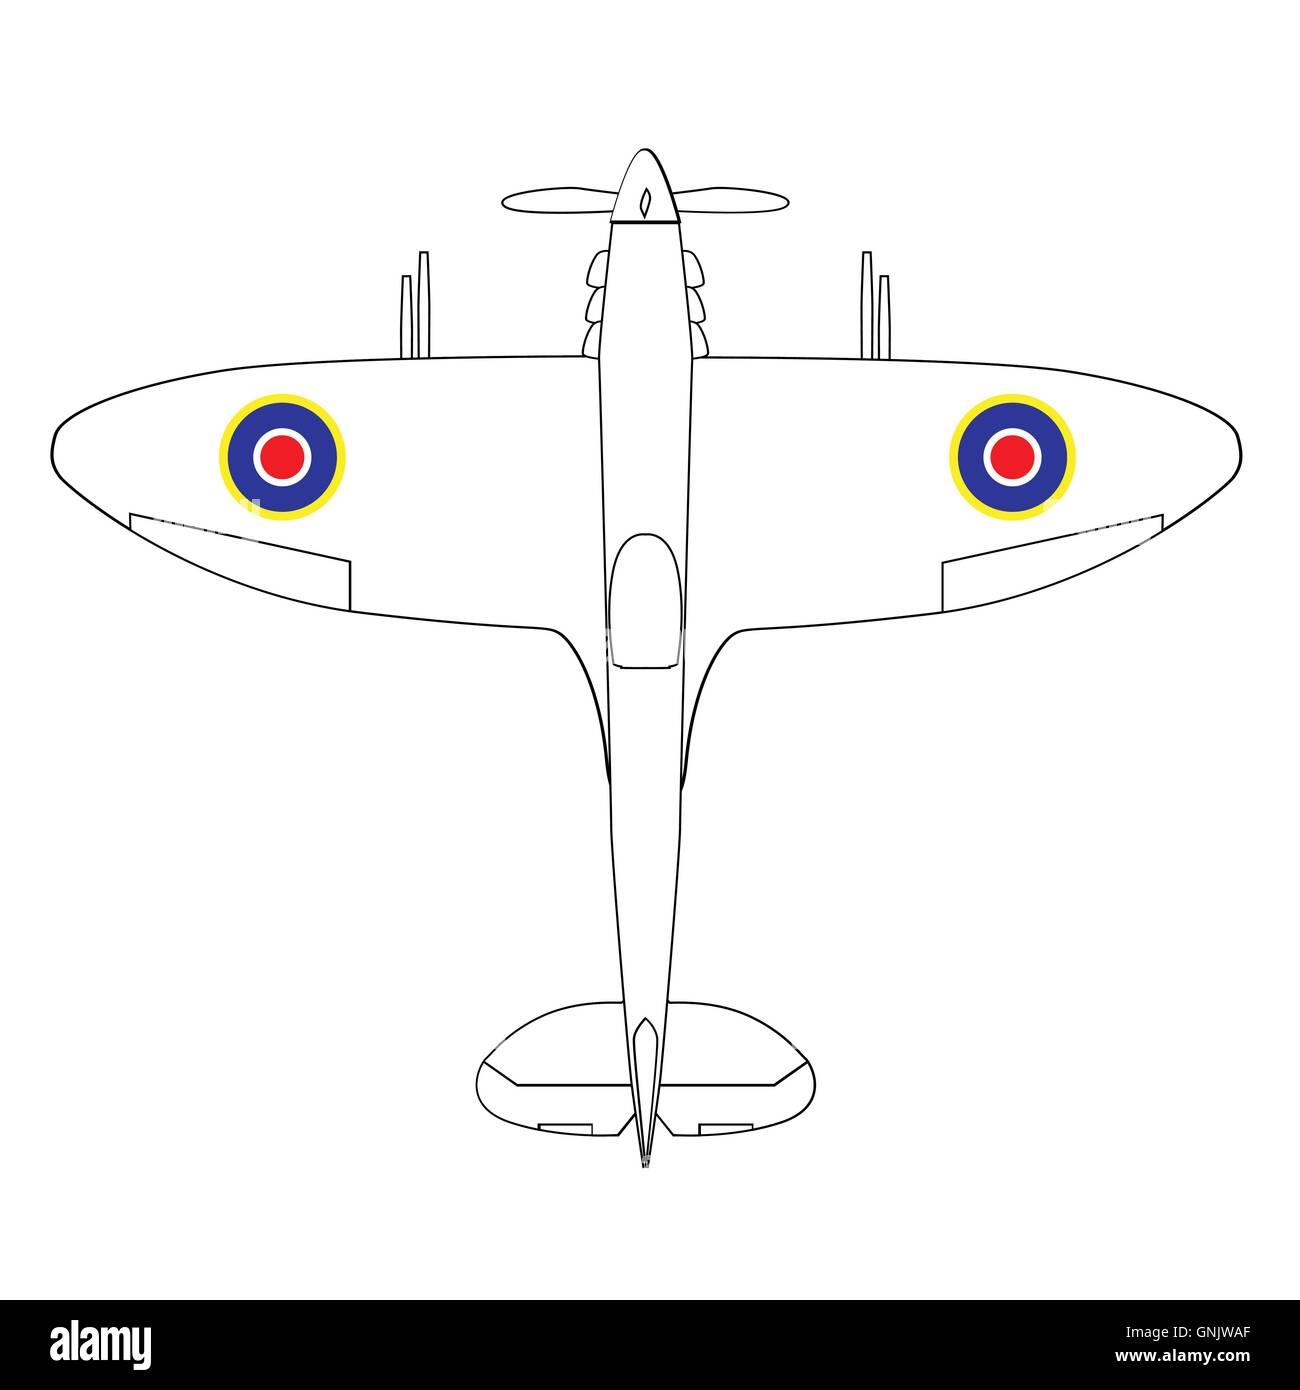 Spitfire Drawing Made Easy: How To Draw A Spitfire in 4 Steps!!